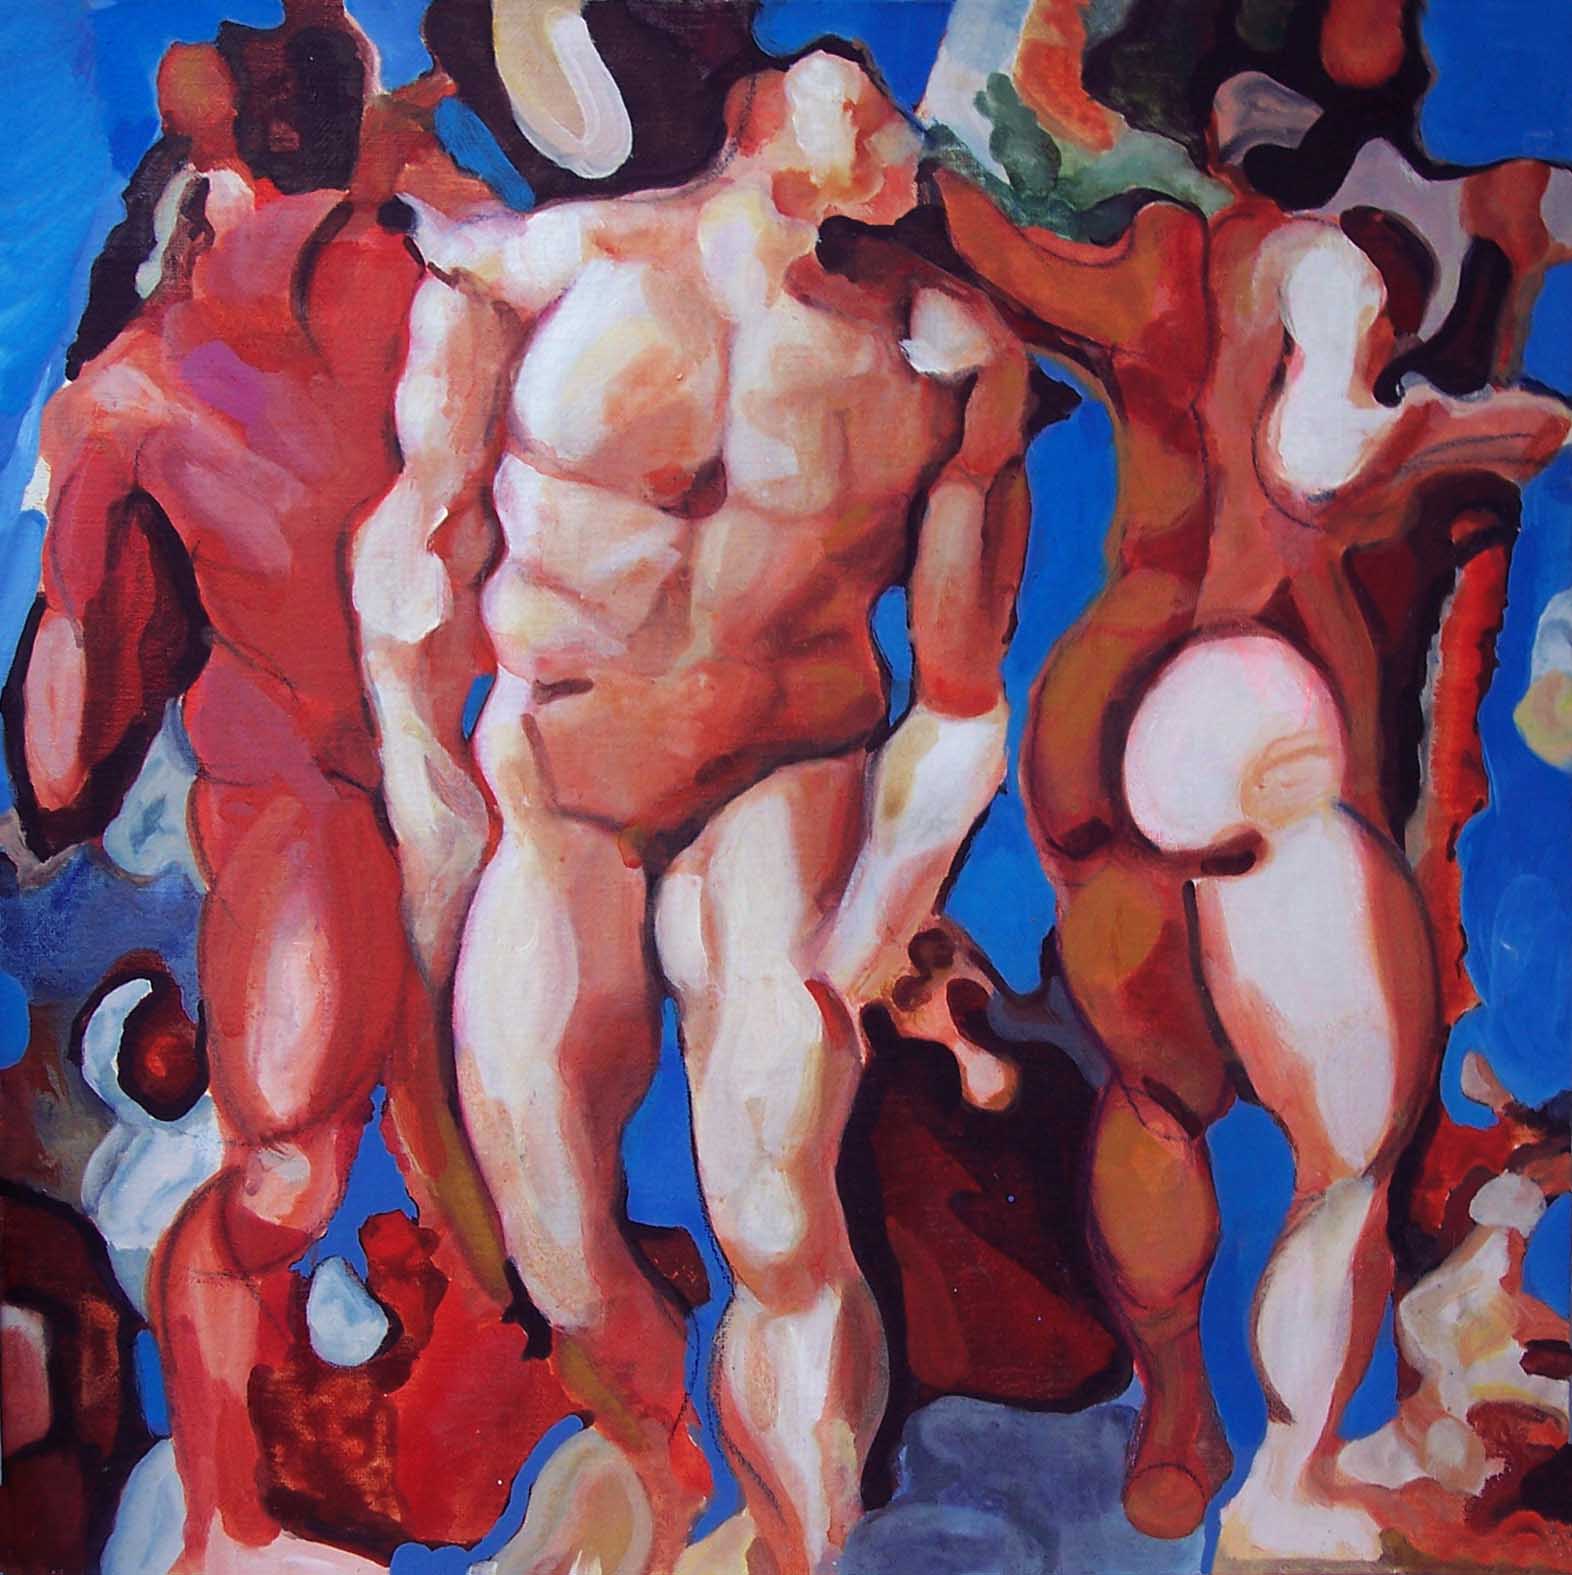 Fabio Modica | Reworking of a detail of the Universal Judgment of Michelangelo - cm 80x80 | 31,5x31,5 inches - acrylic on canvas - 2005